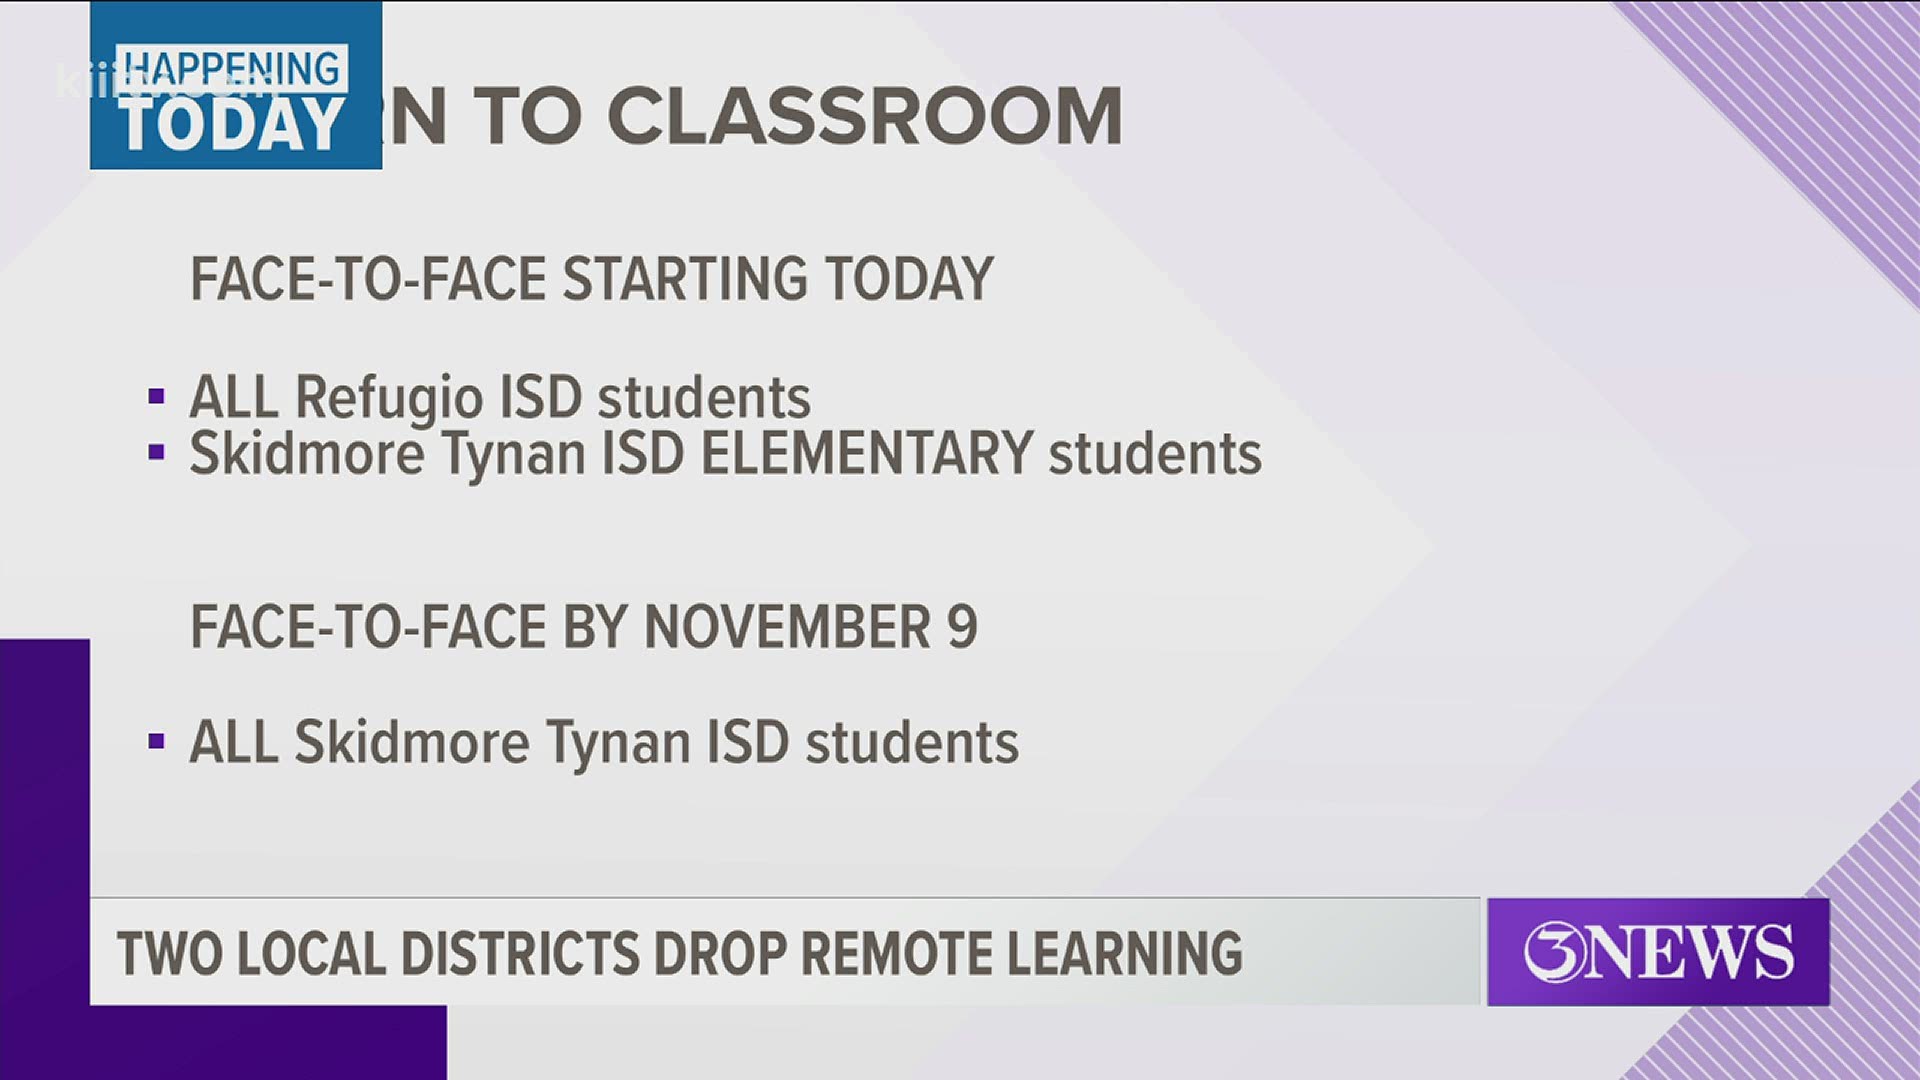 Monday, October 19 Refugio ISD and Skidmore-Tynan Elementary students returned to the classroom.